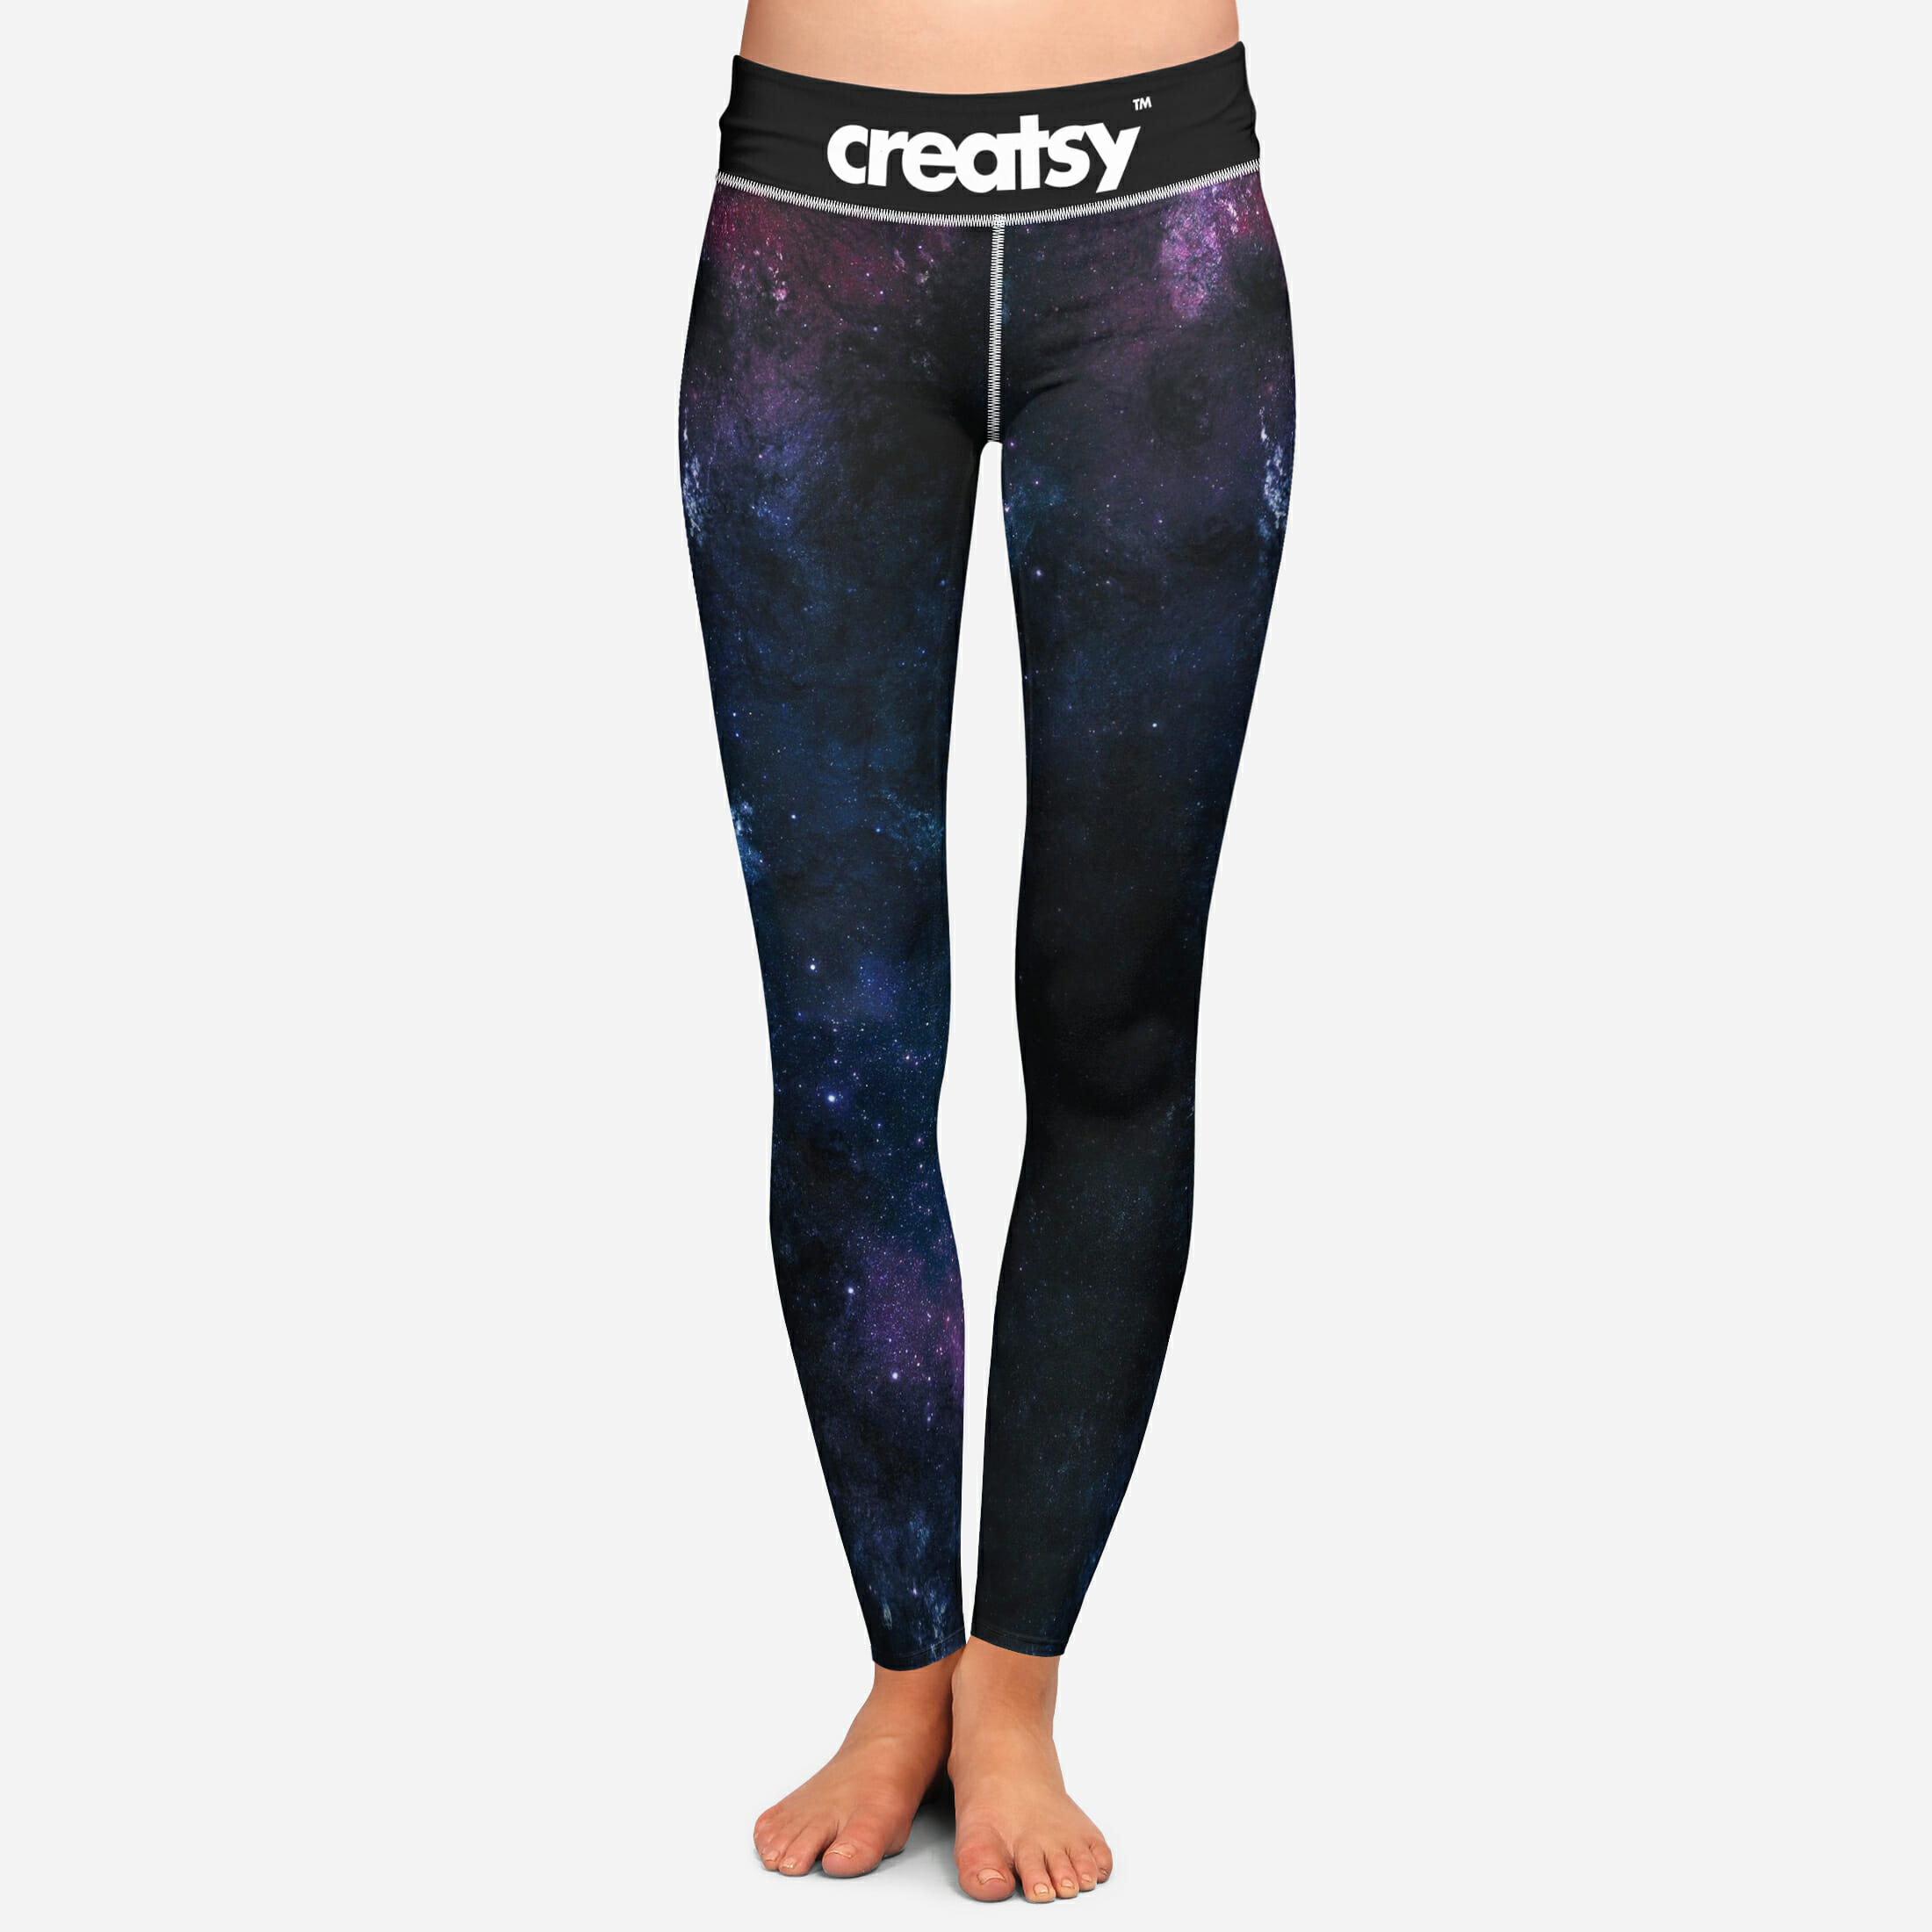 Download Free Leggings MockUp PSD For Fashion and Apparel | Awesome Mockups